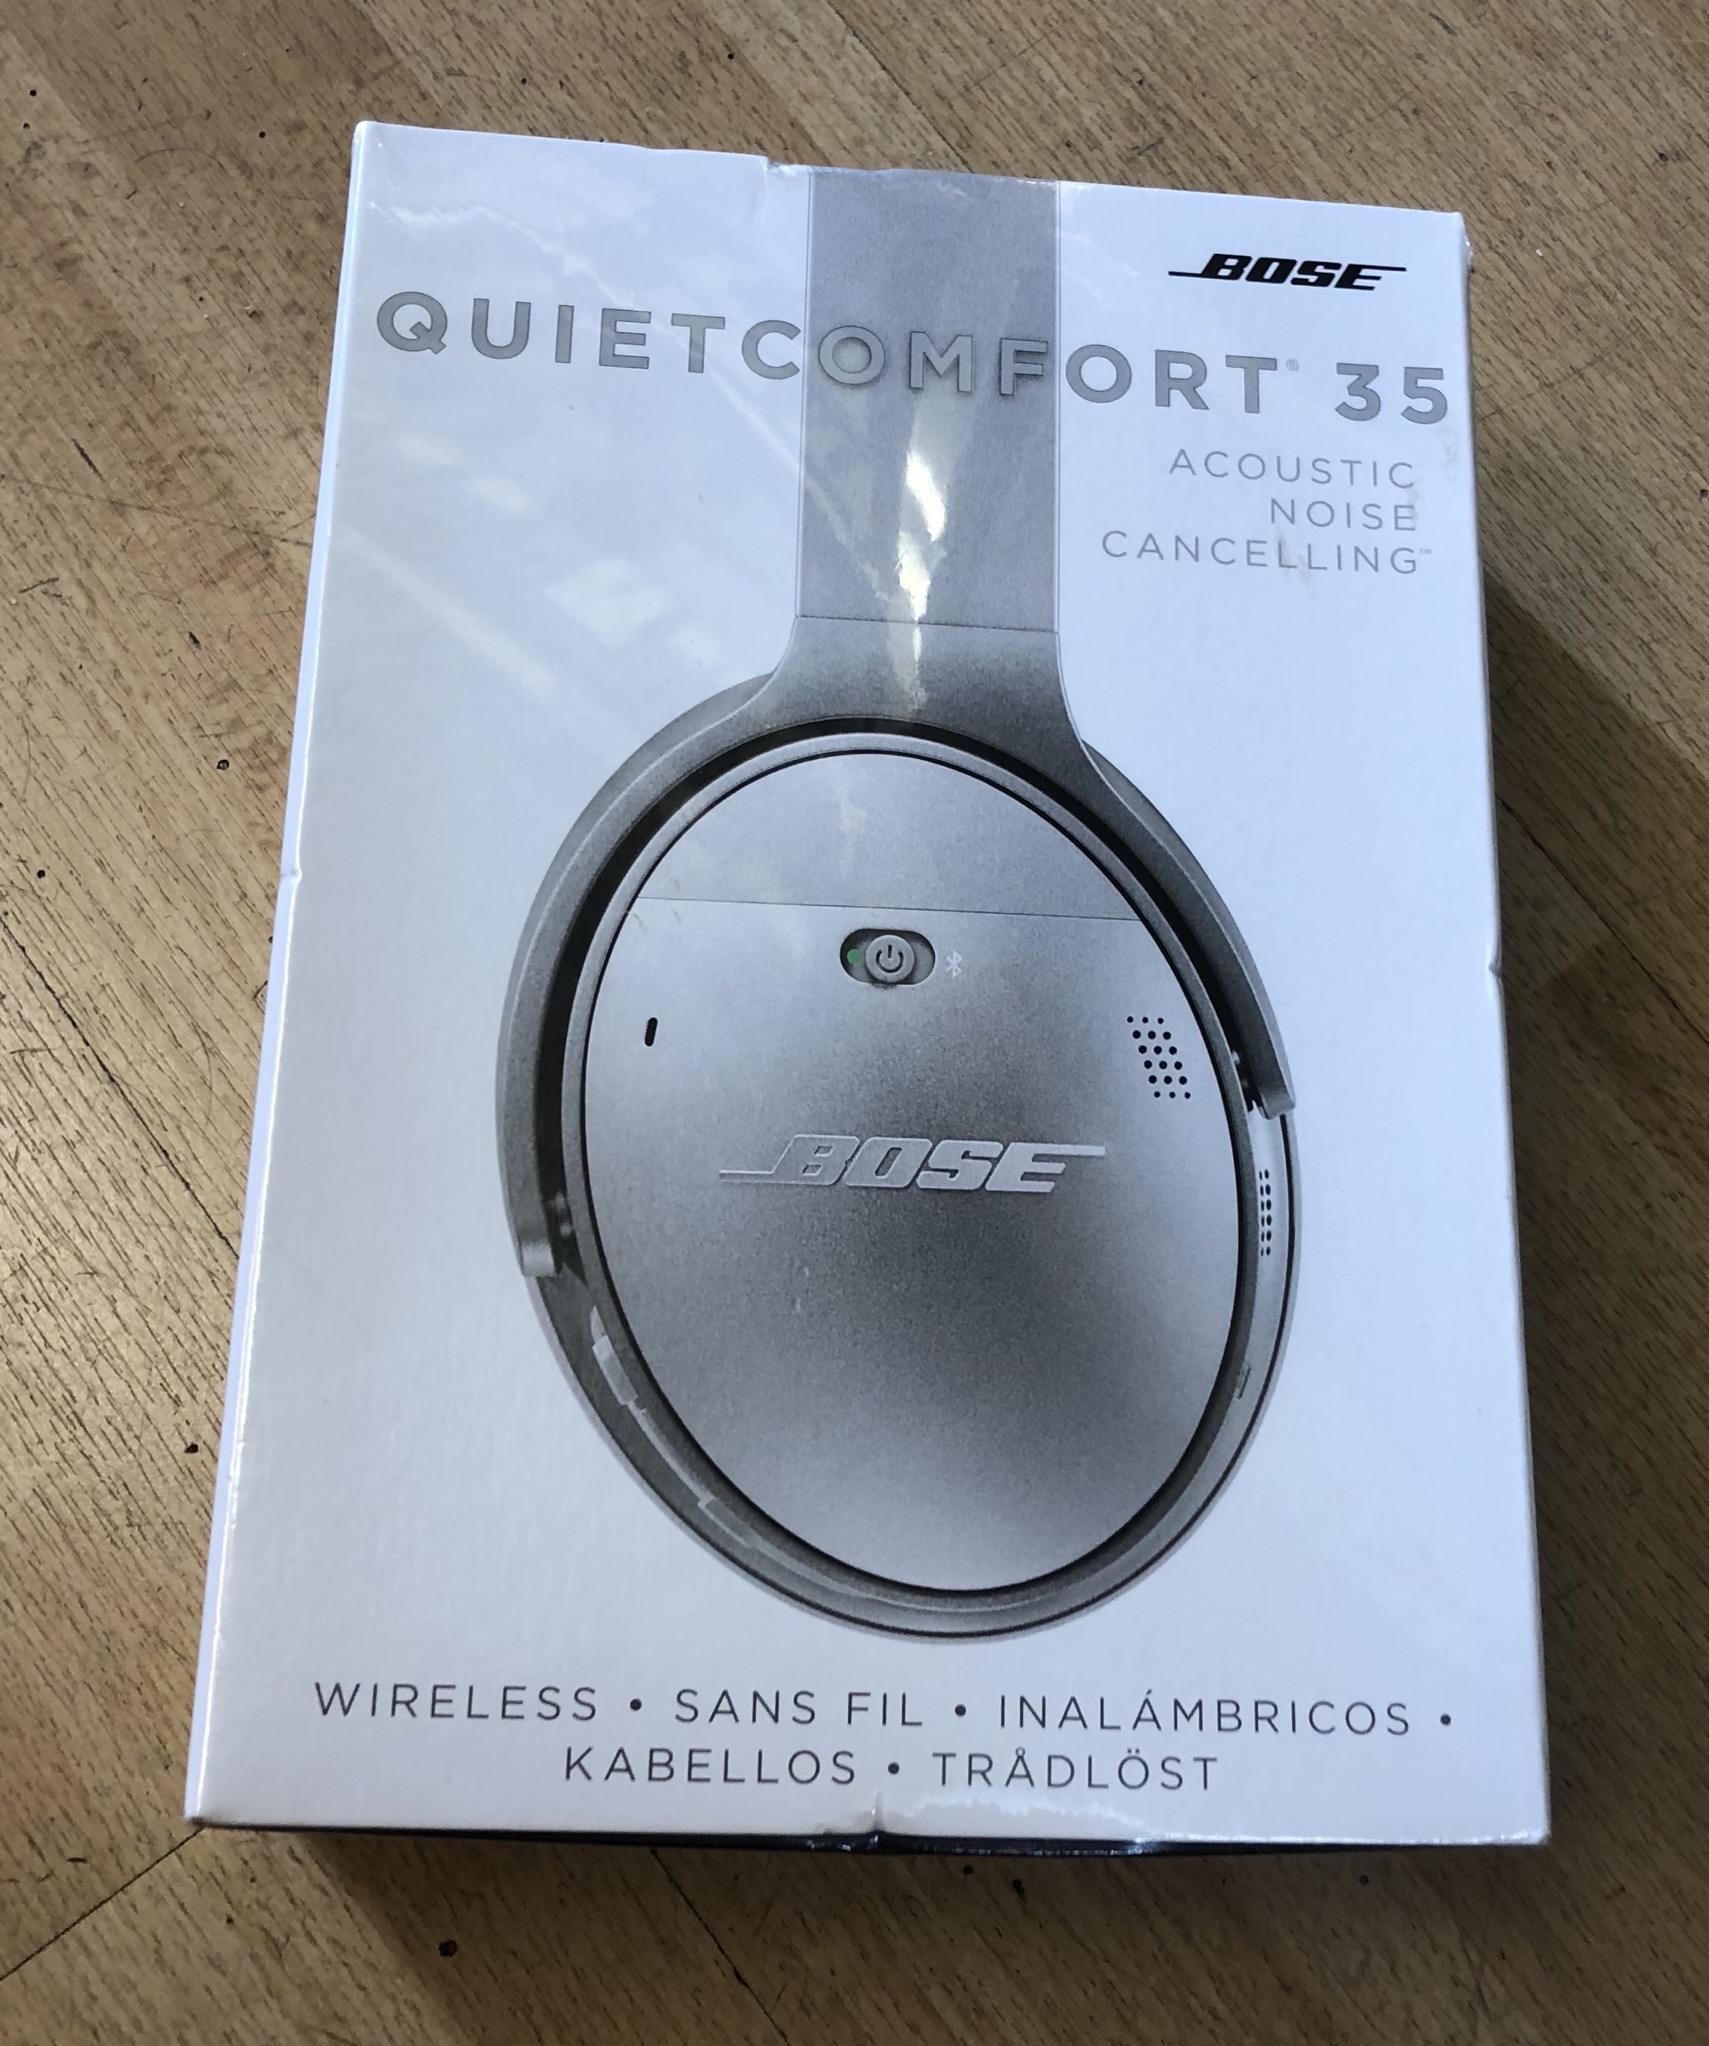 Bose Quiet Comfort 35 for sale at X Electrical